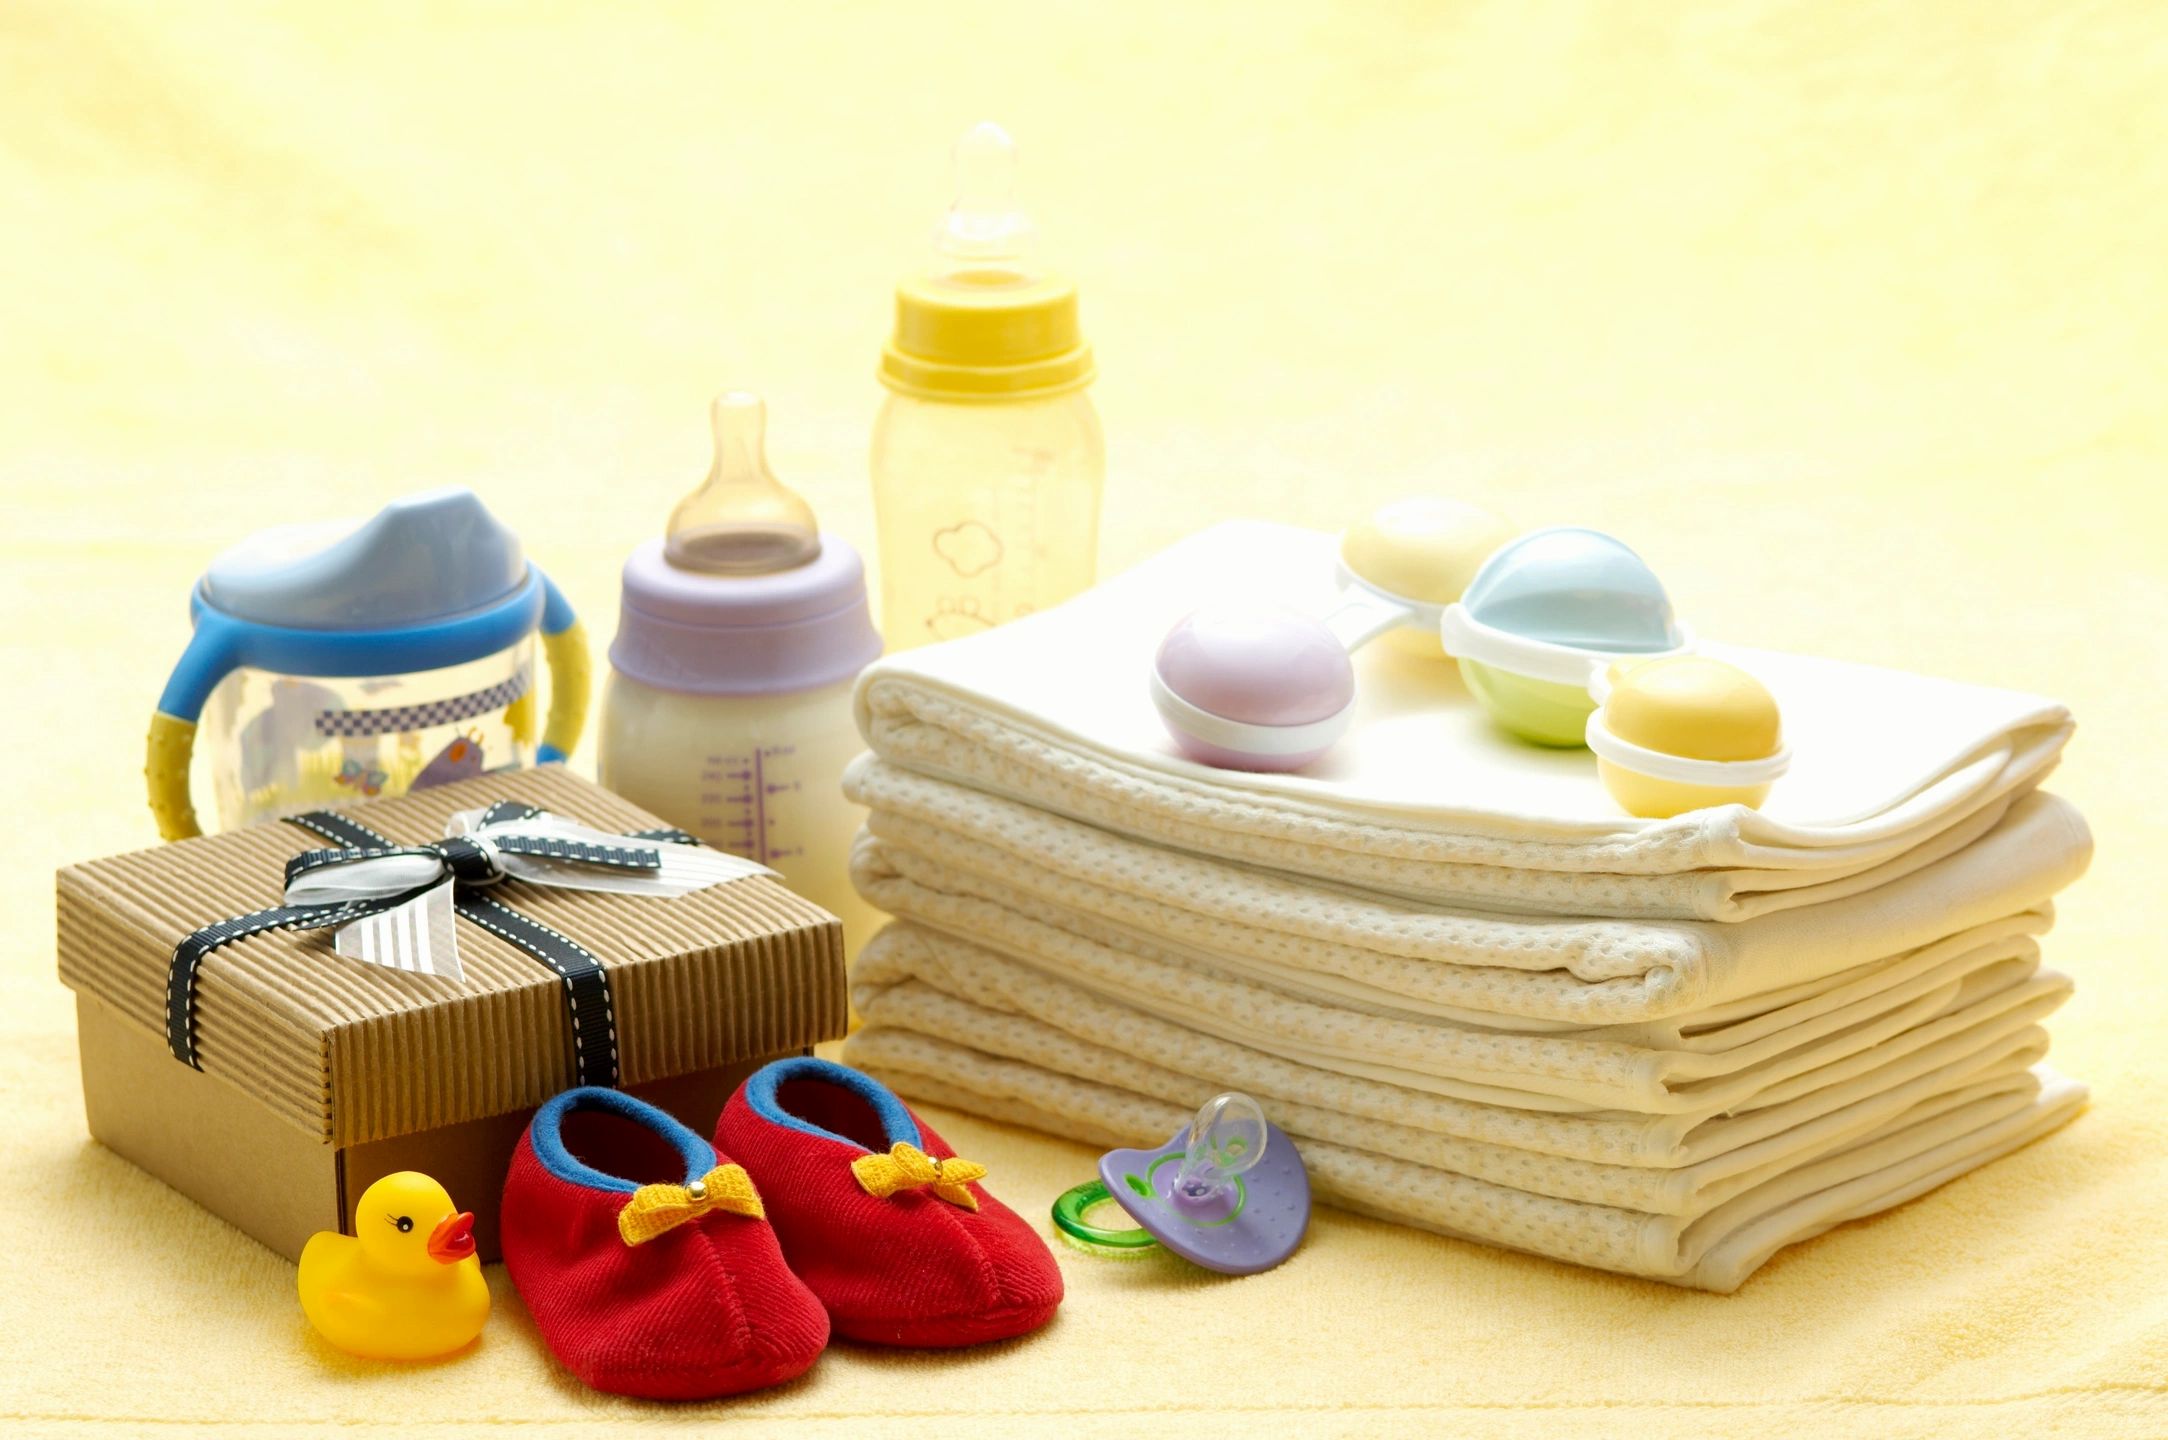 90 Baby Items List A-Z Checklist: 70 Essential Items and 20 Items You Don't Need